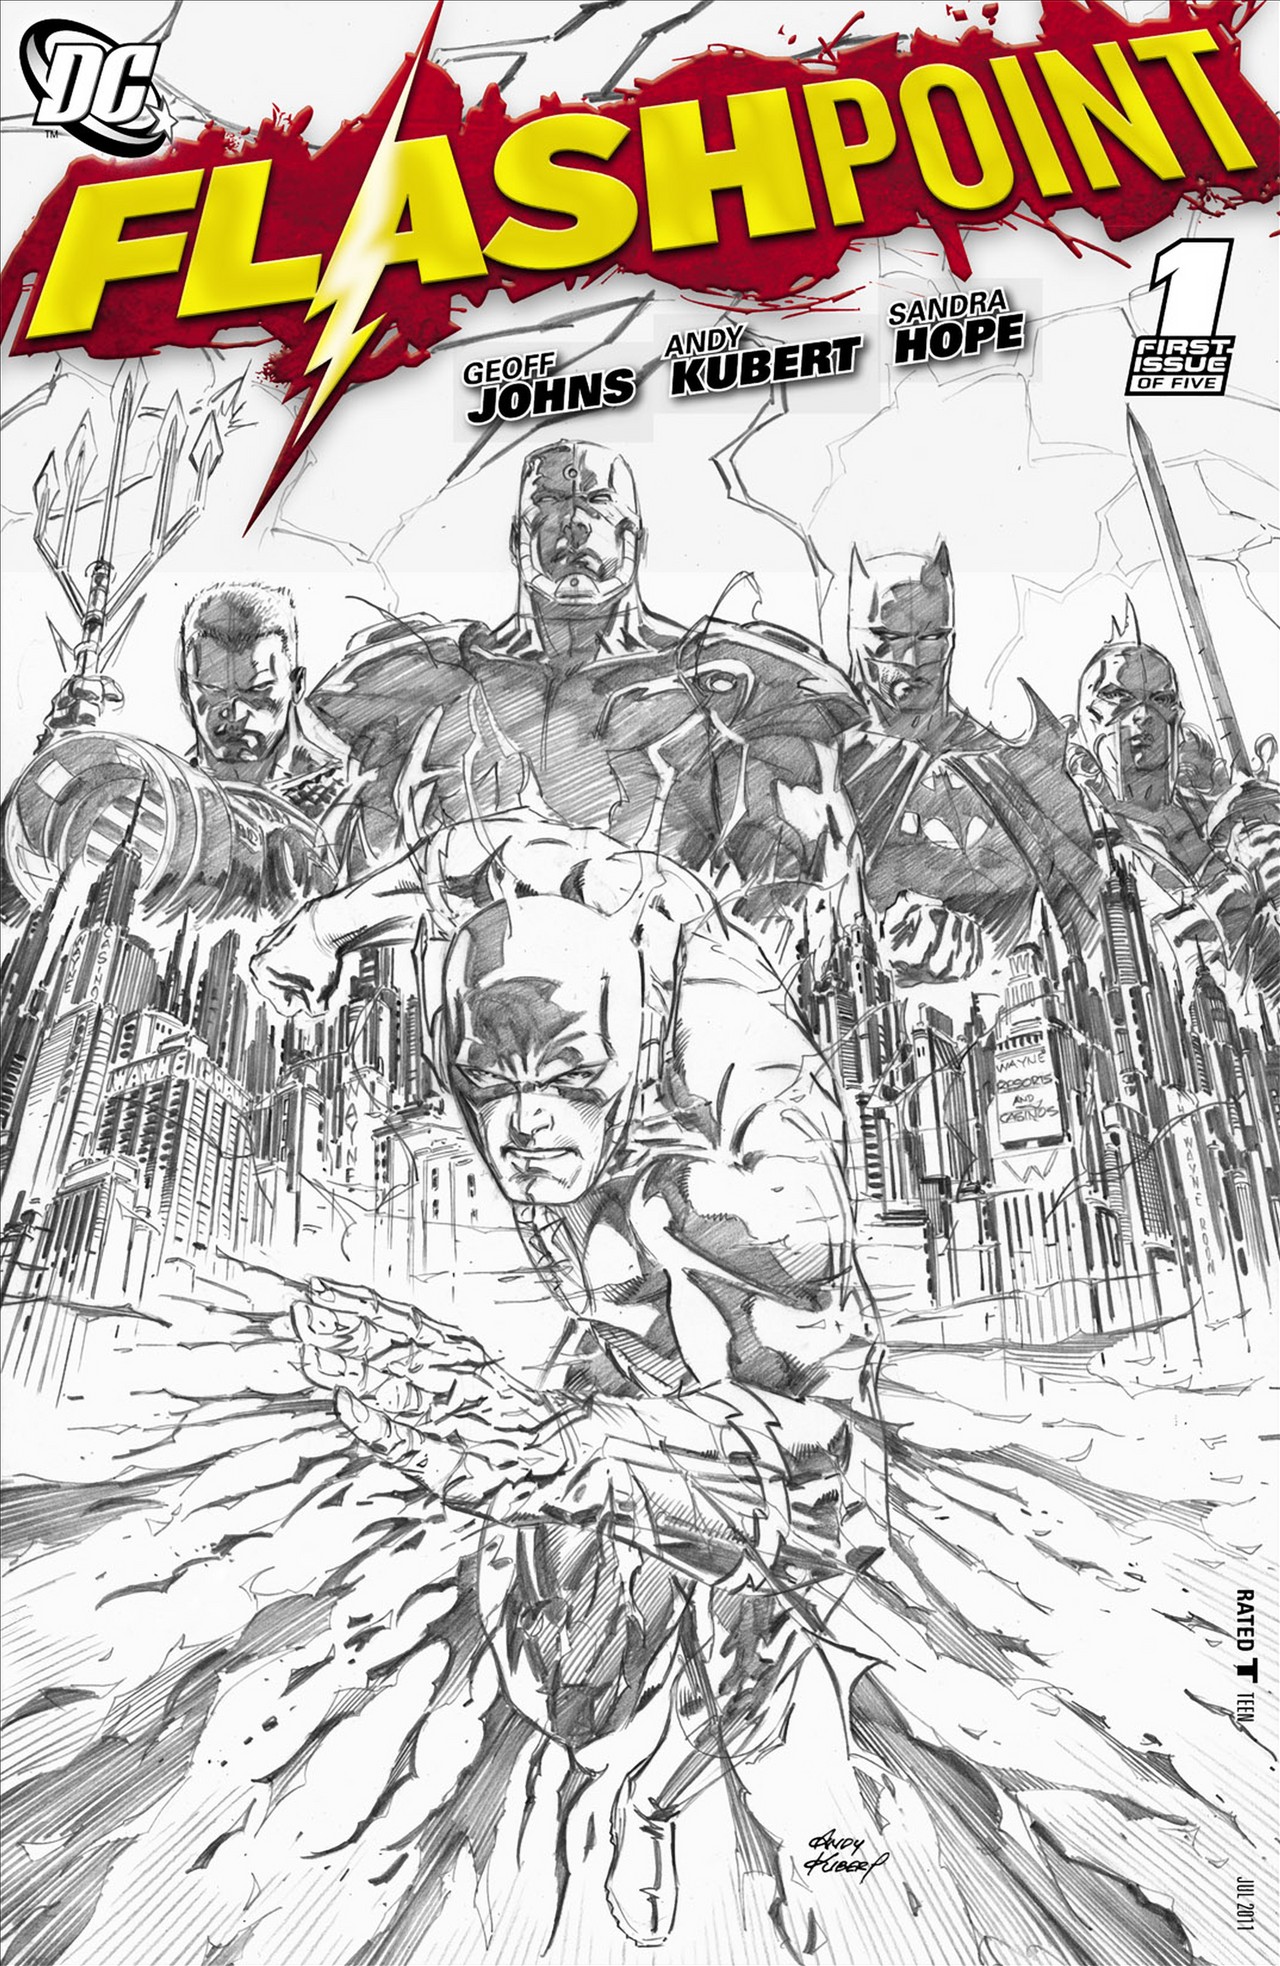 Read online Flashpoint comic -  Issue #1 - 3